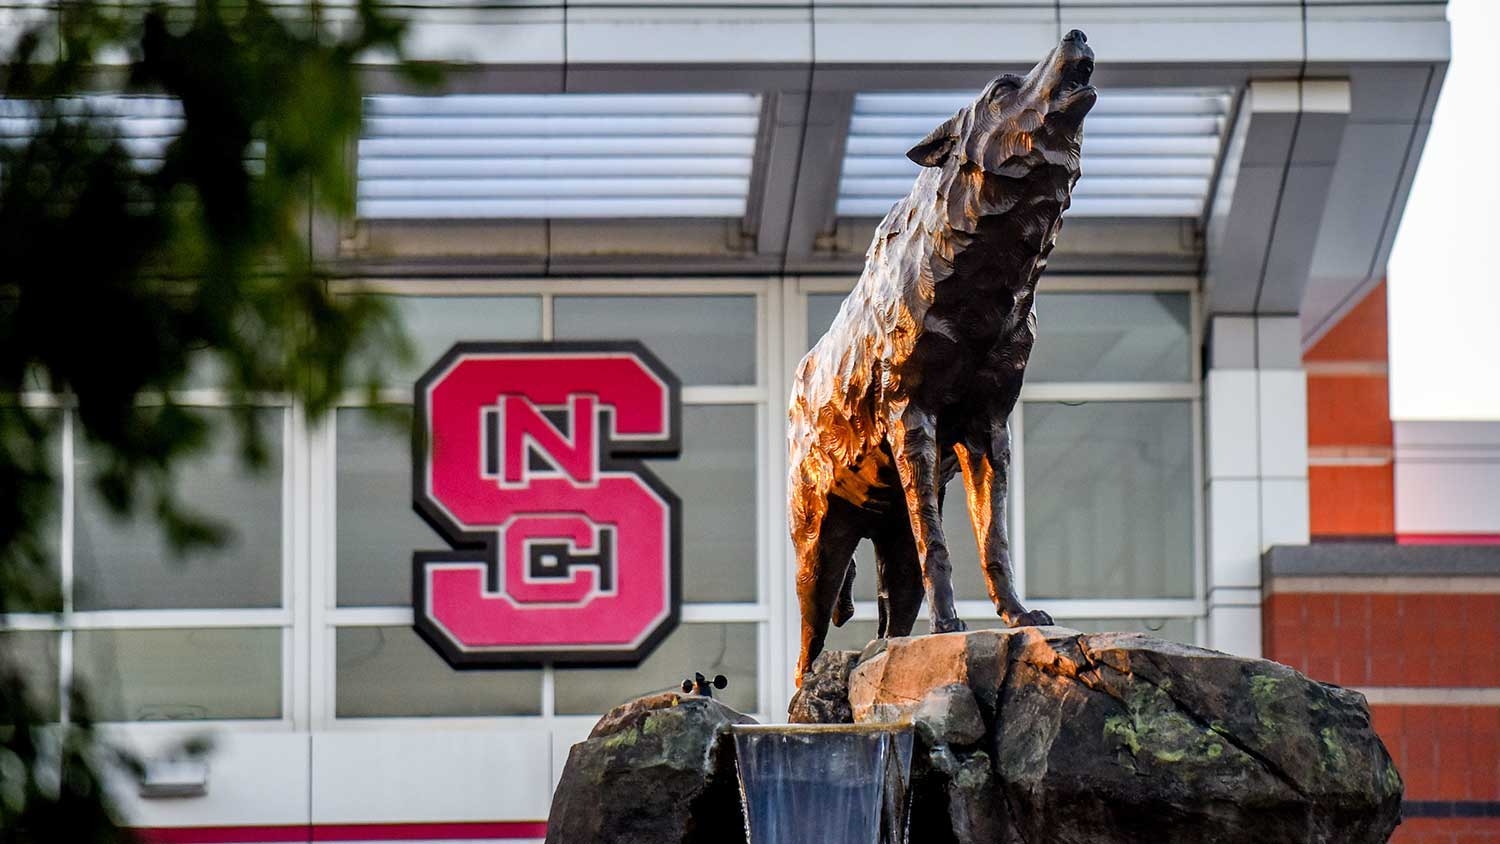 The wolf statue in front of Carter-Finley.